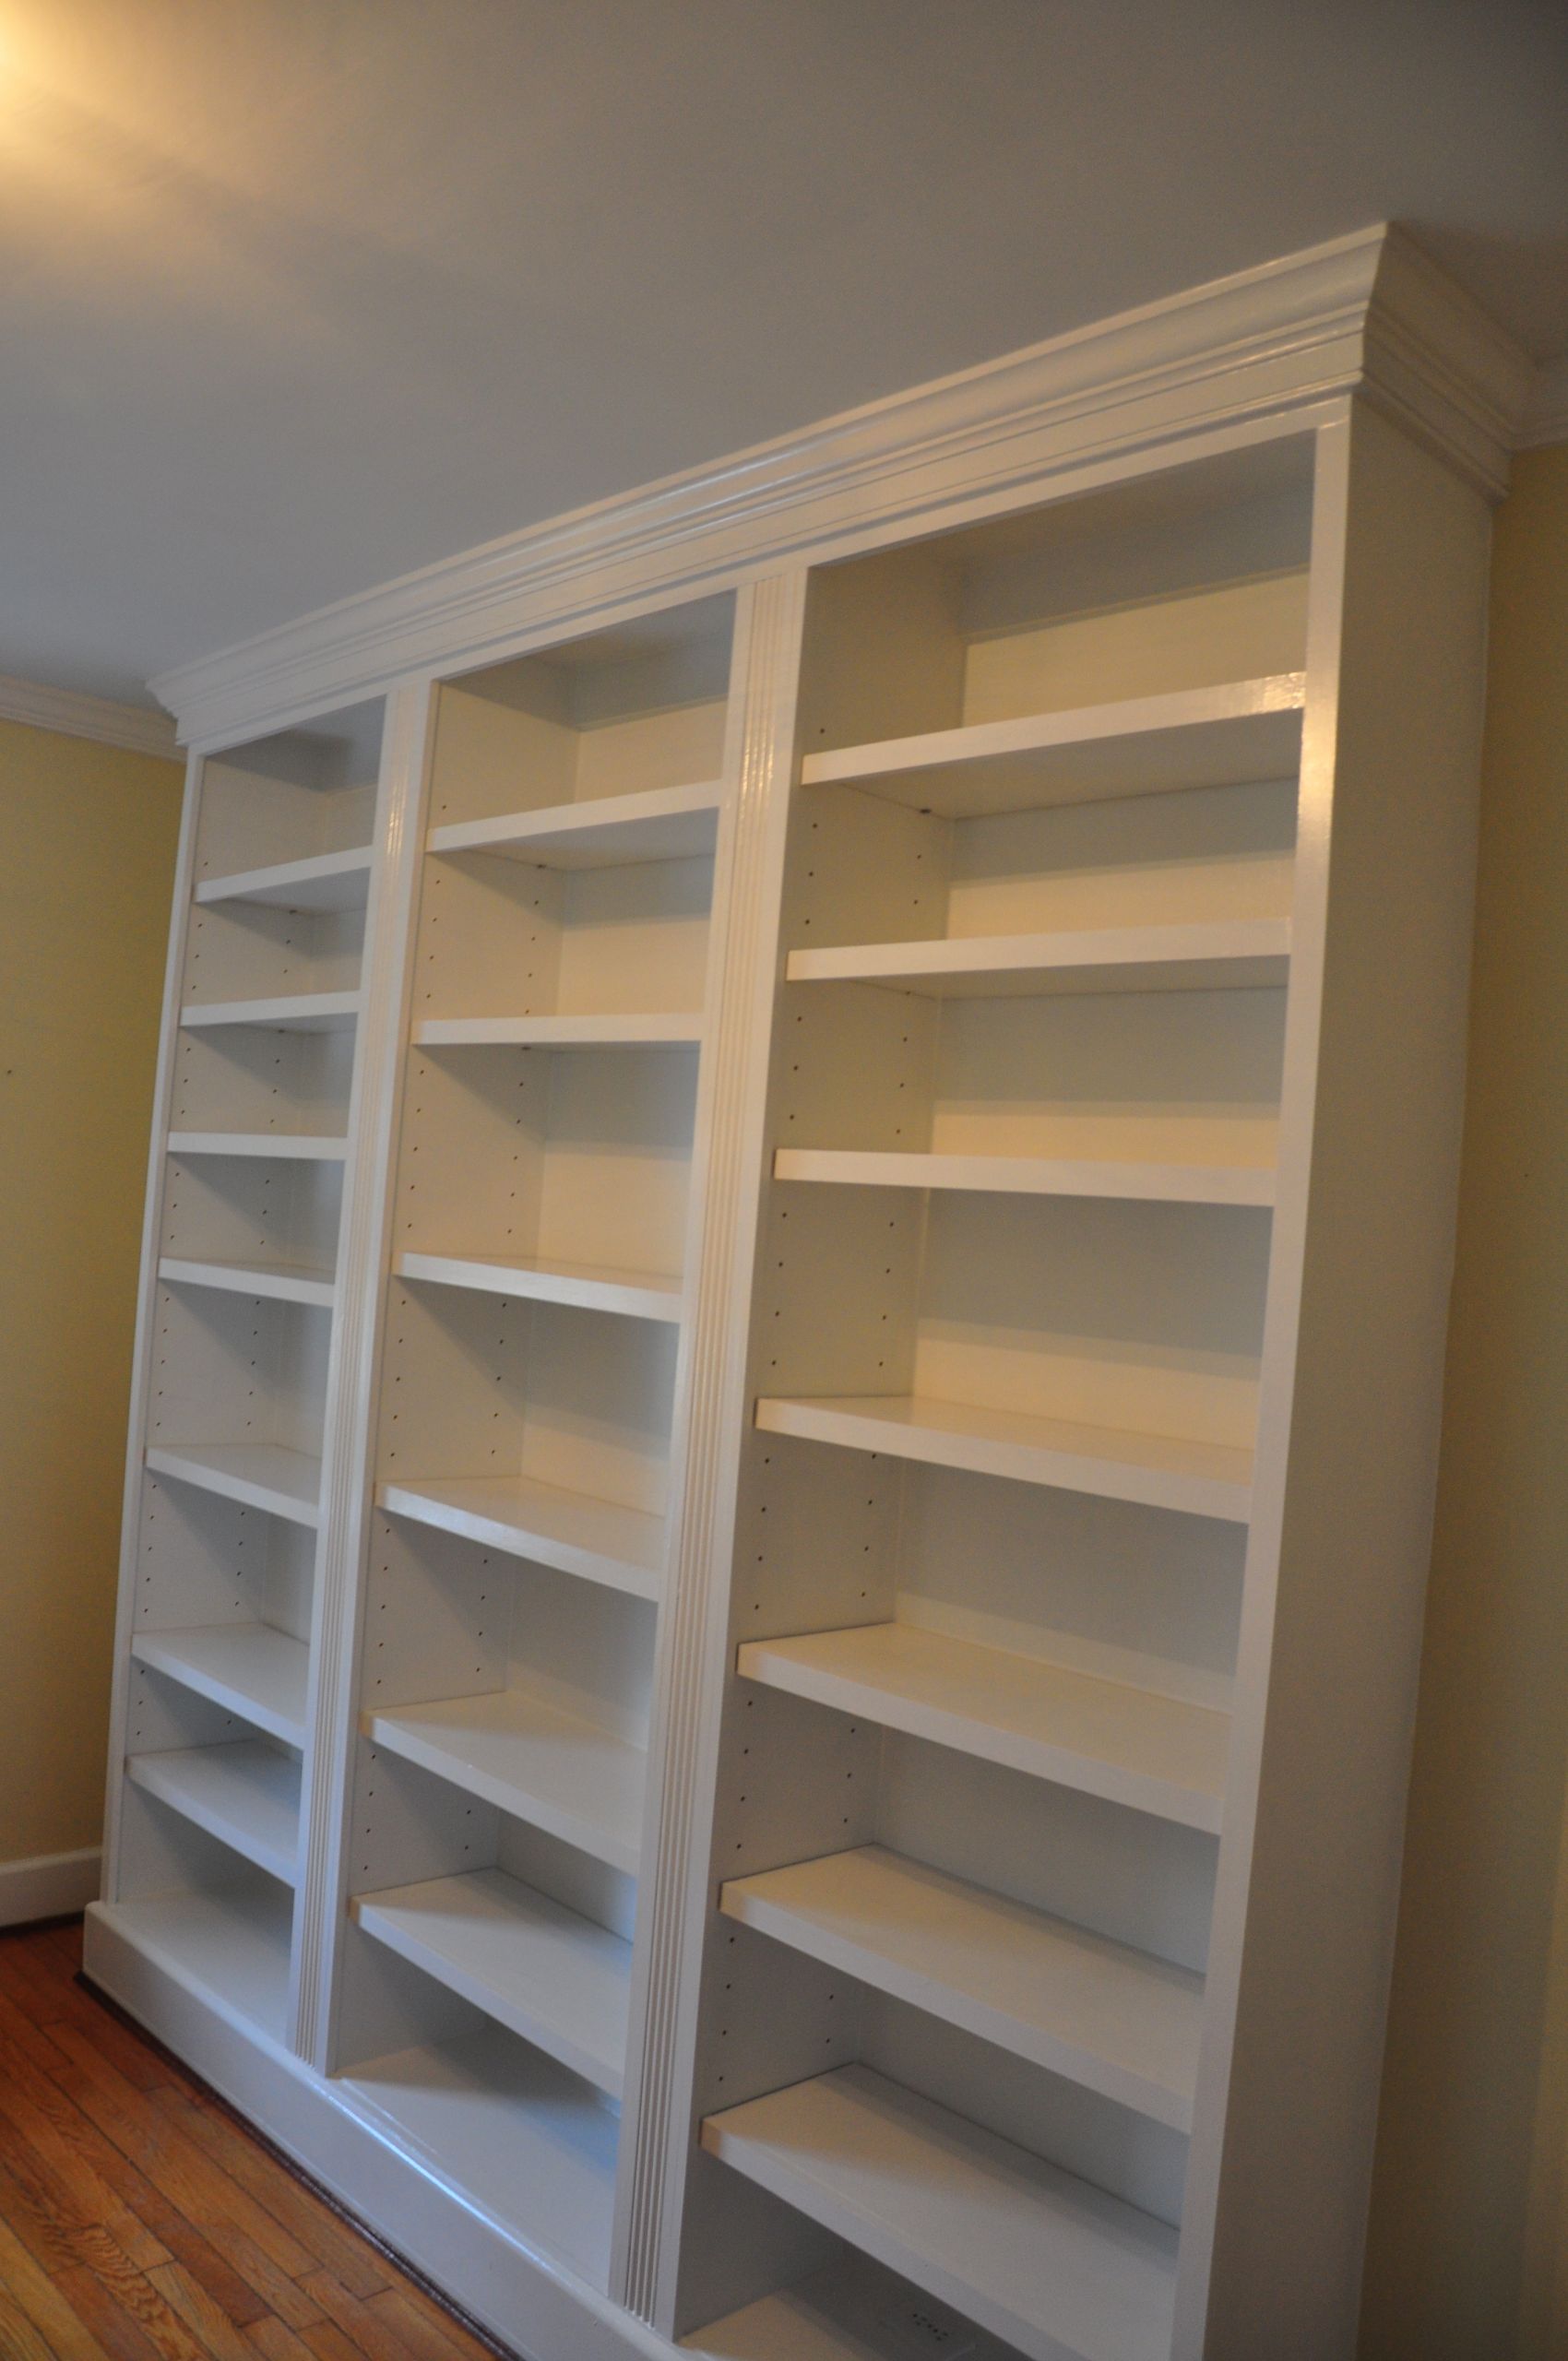 DIY Built In Bookcase Plans
 15 Inspirations of Bookcase Plans